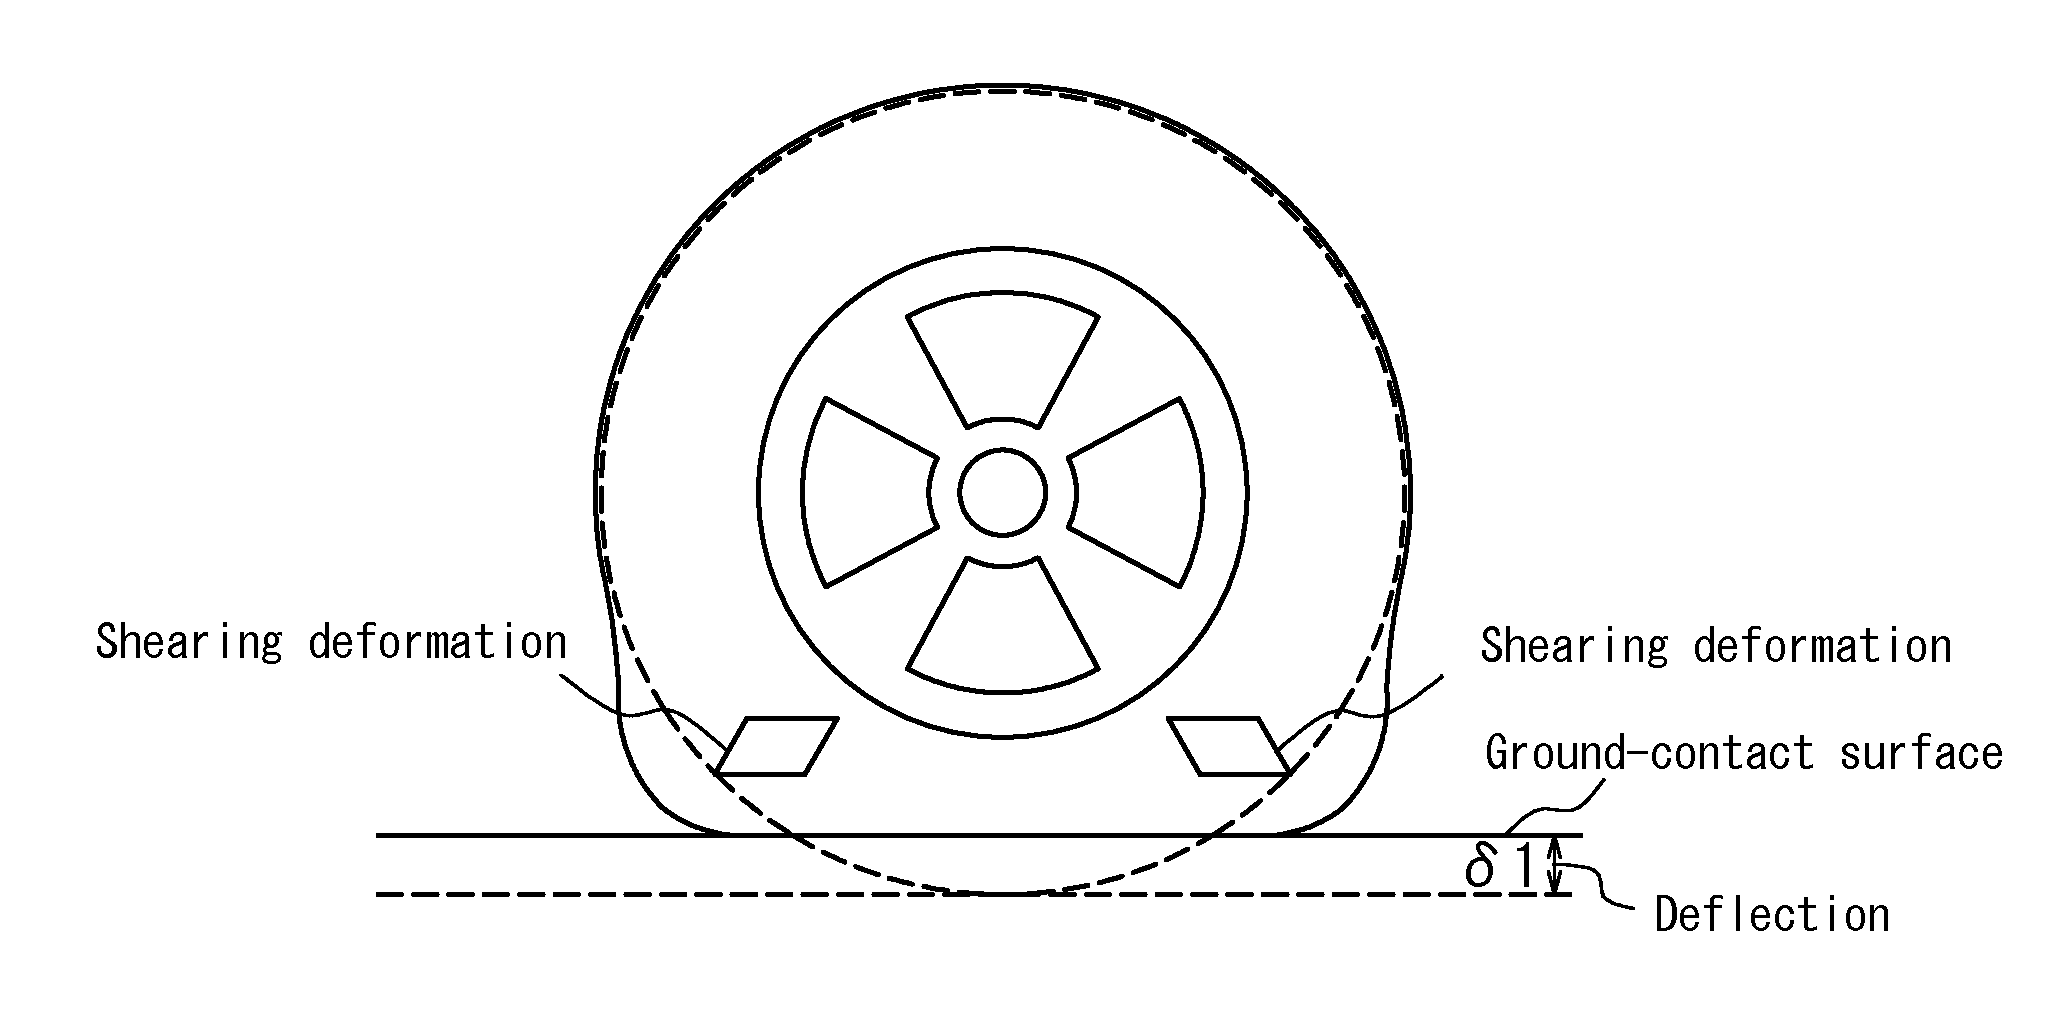 Pneumatic radial tire for passenger vehicle, method for using the tire, and tire-rim assembly including the tire